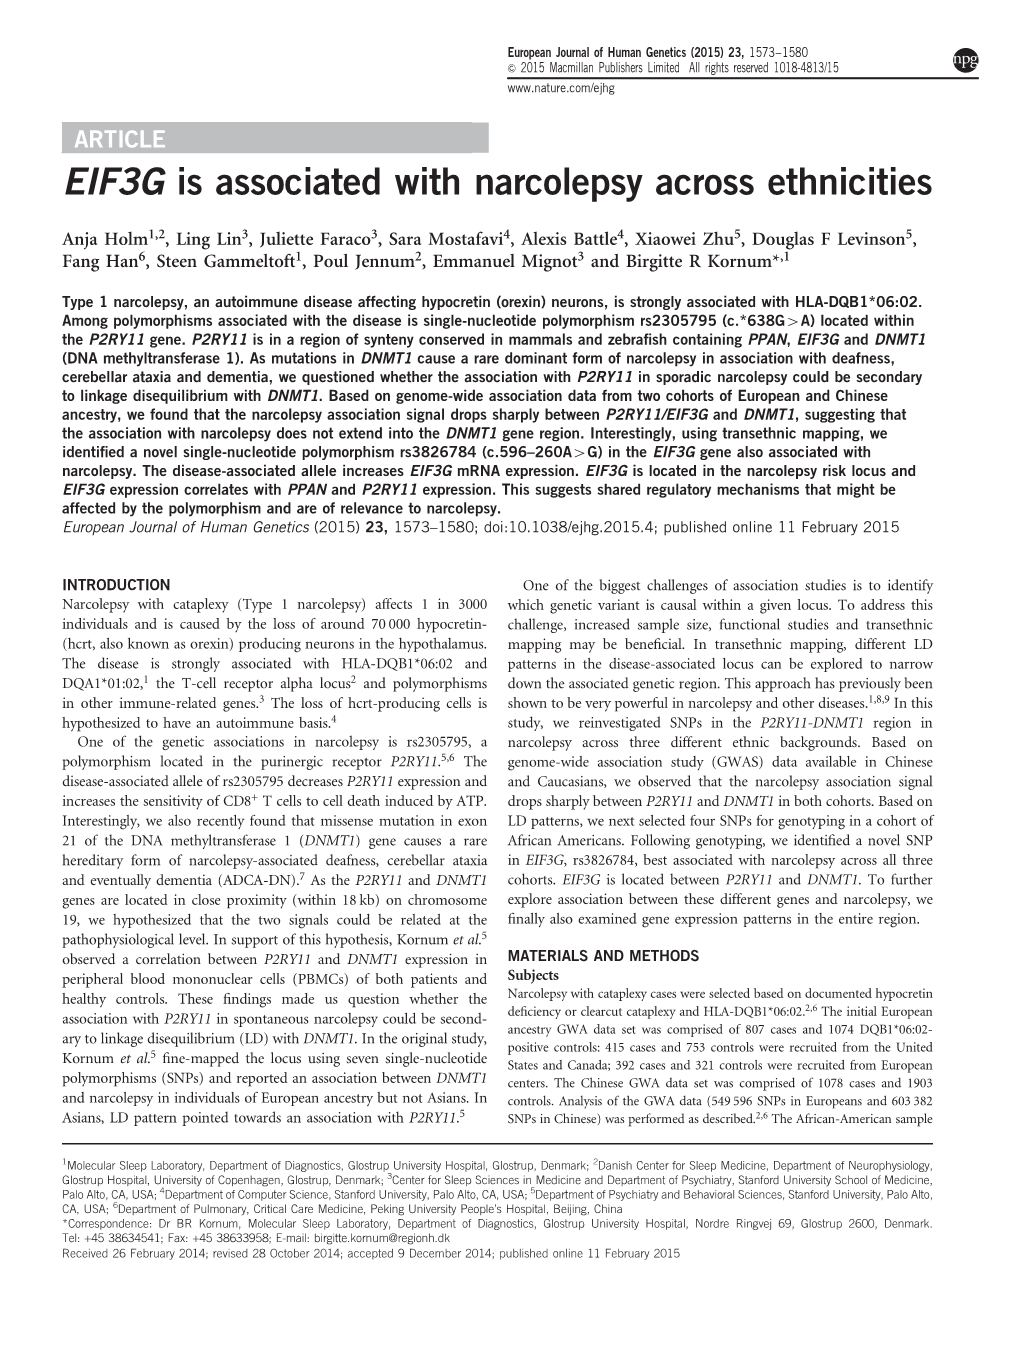 EIF3G Is Associated with Narcolepsy Across Ethnicities